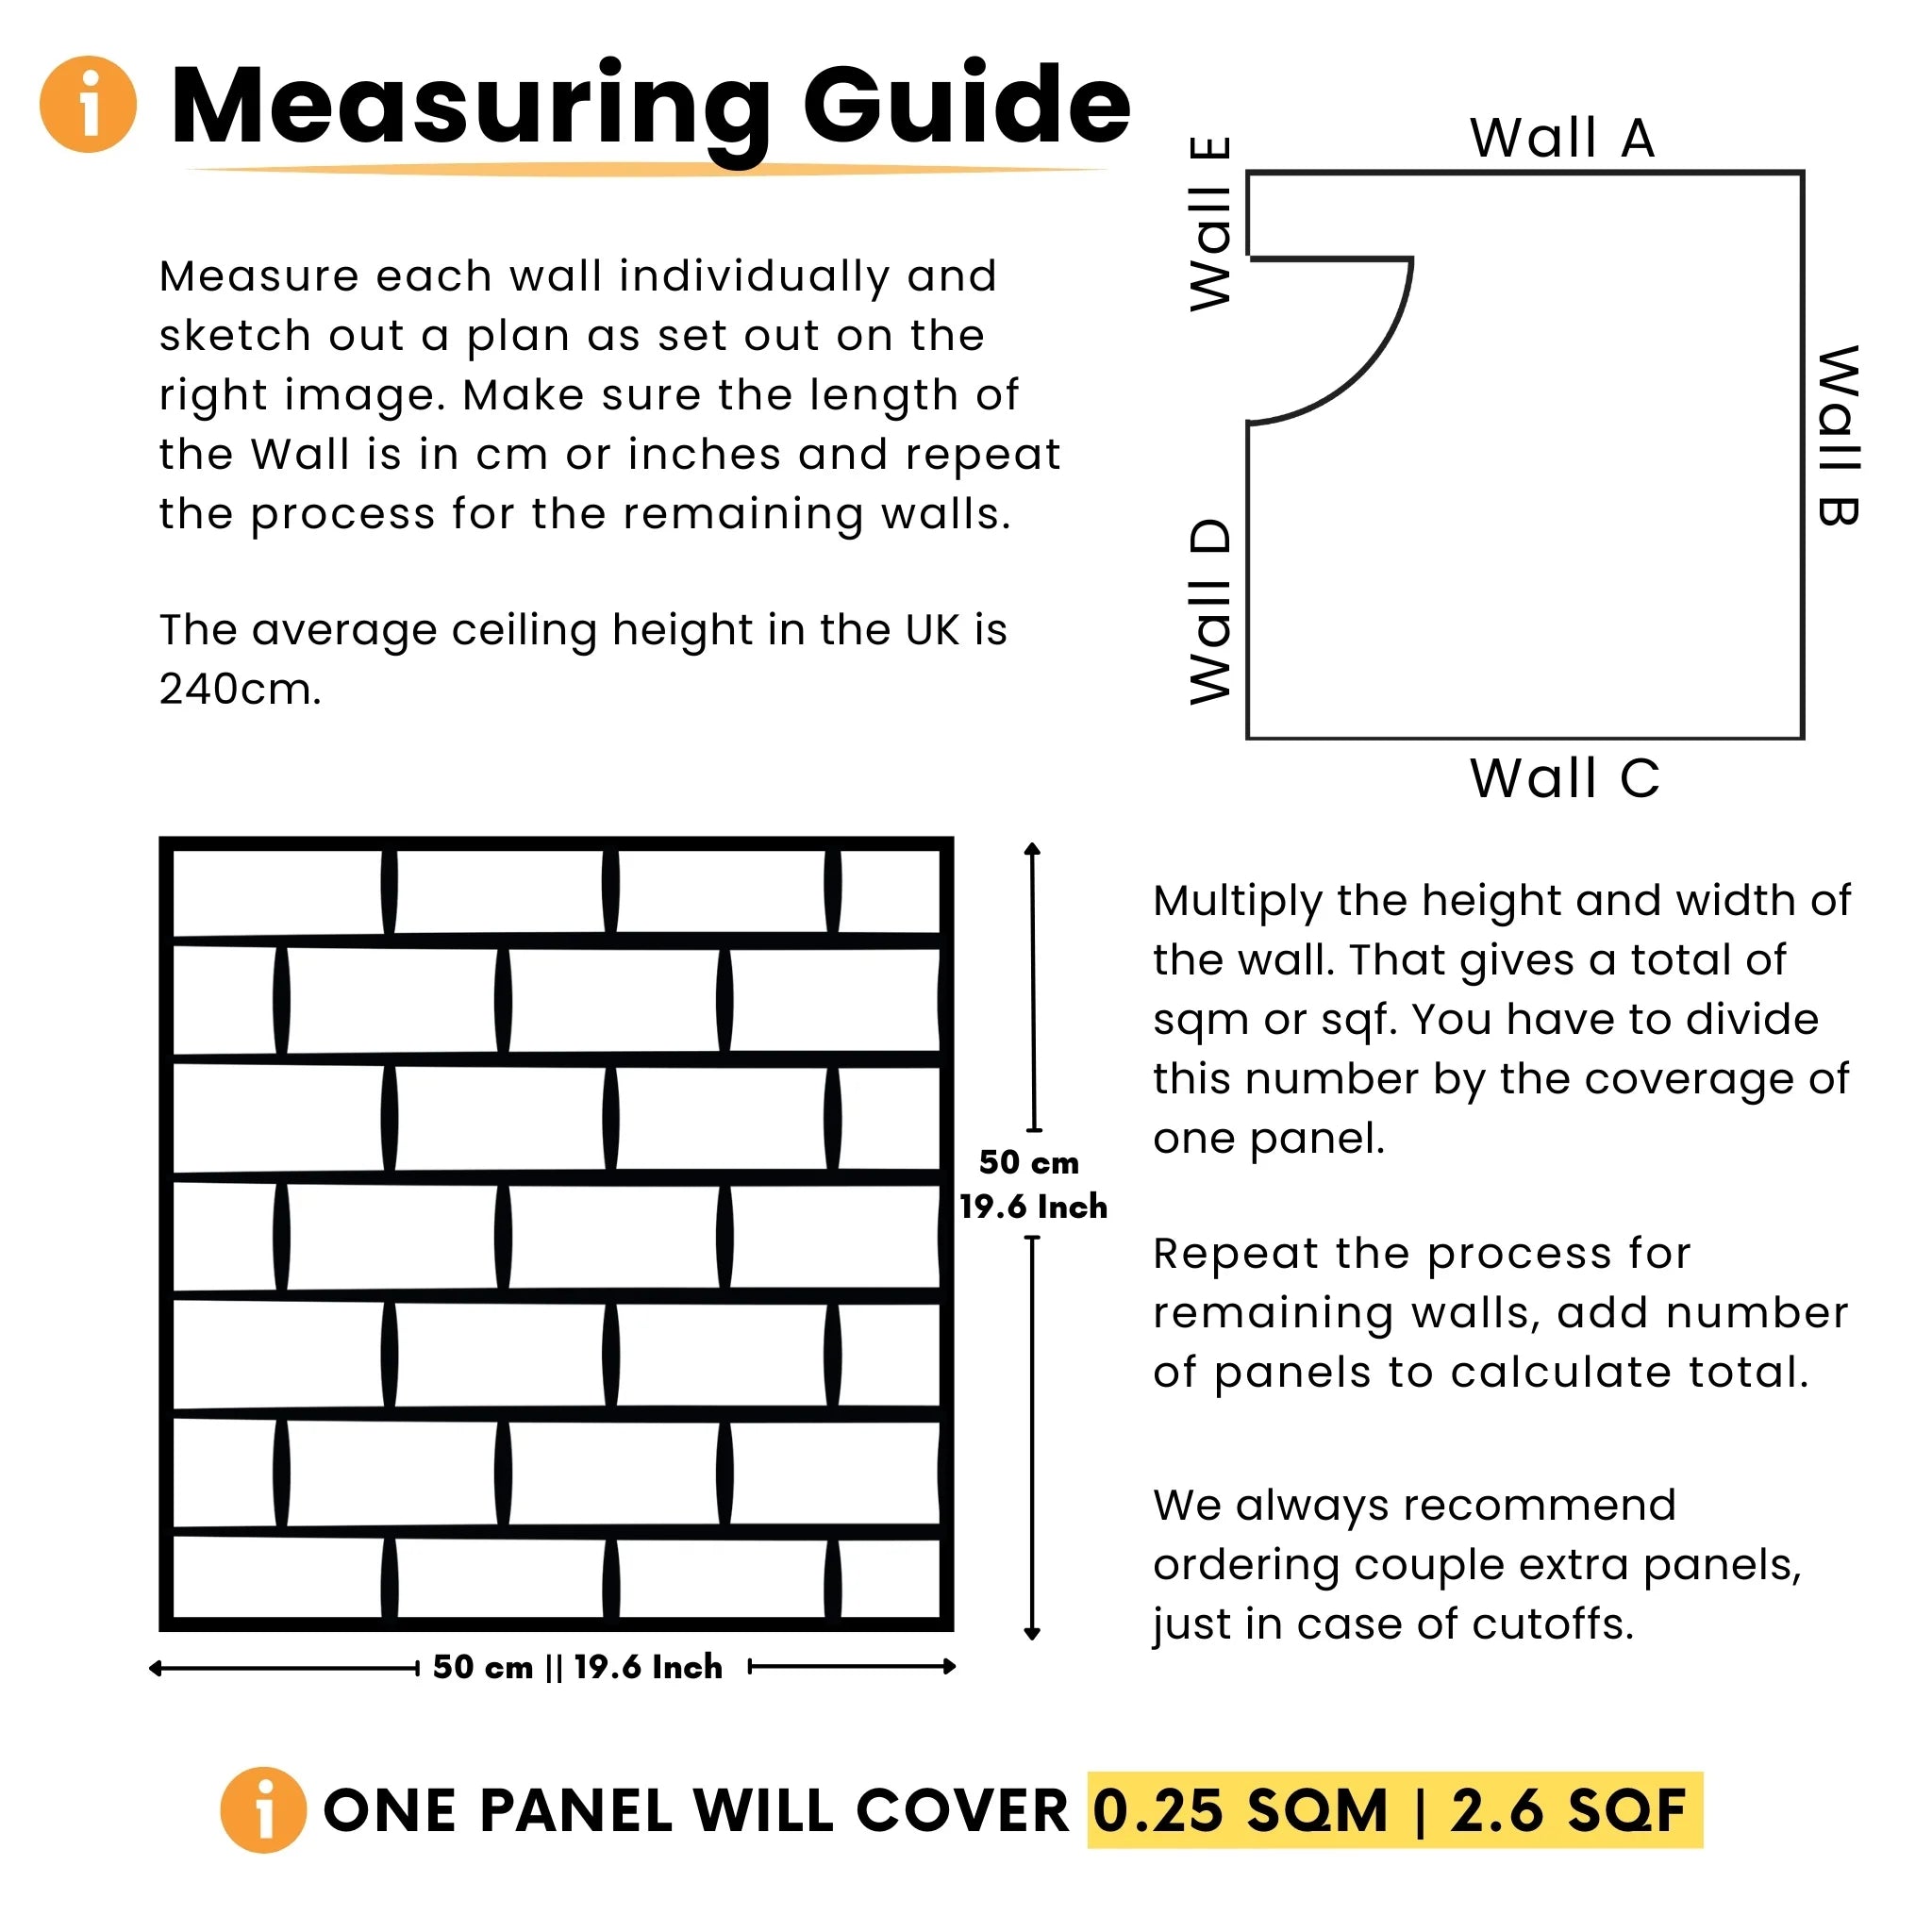 Measuring guide for White PVC wall panels, includes dimensions and coverage